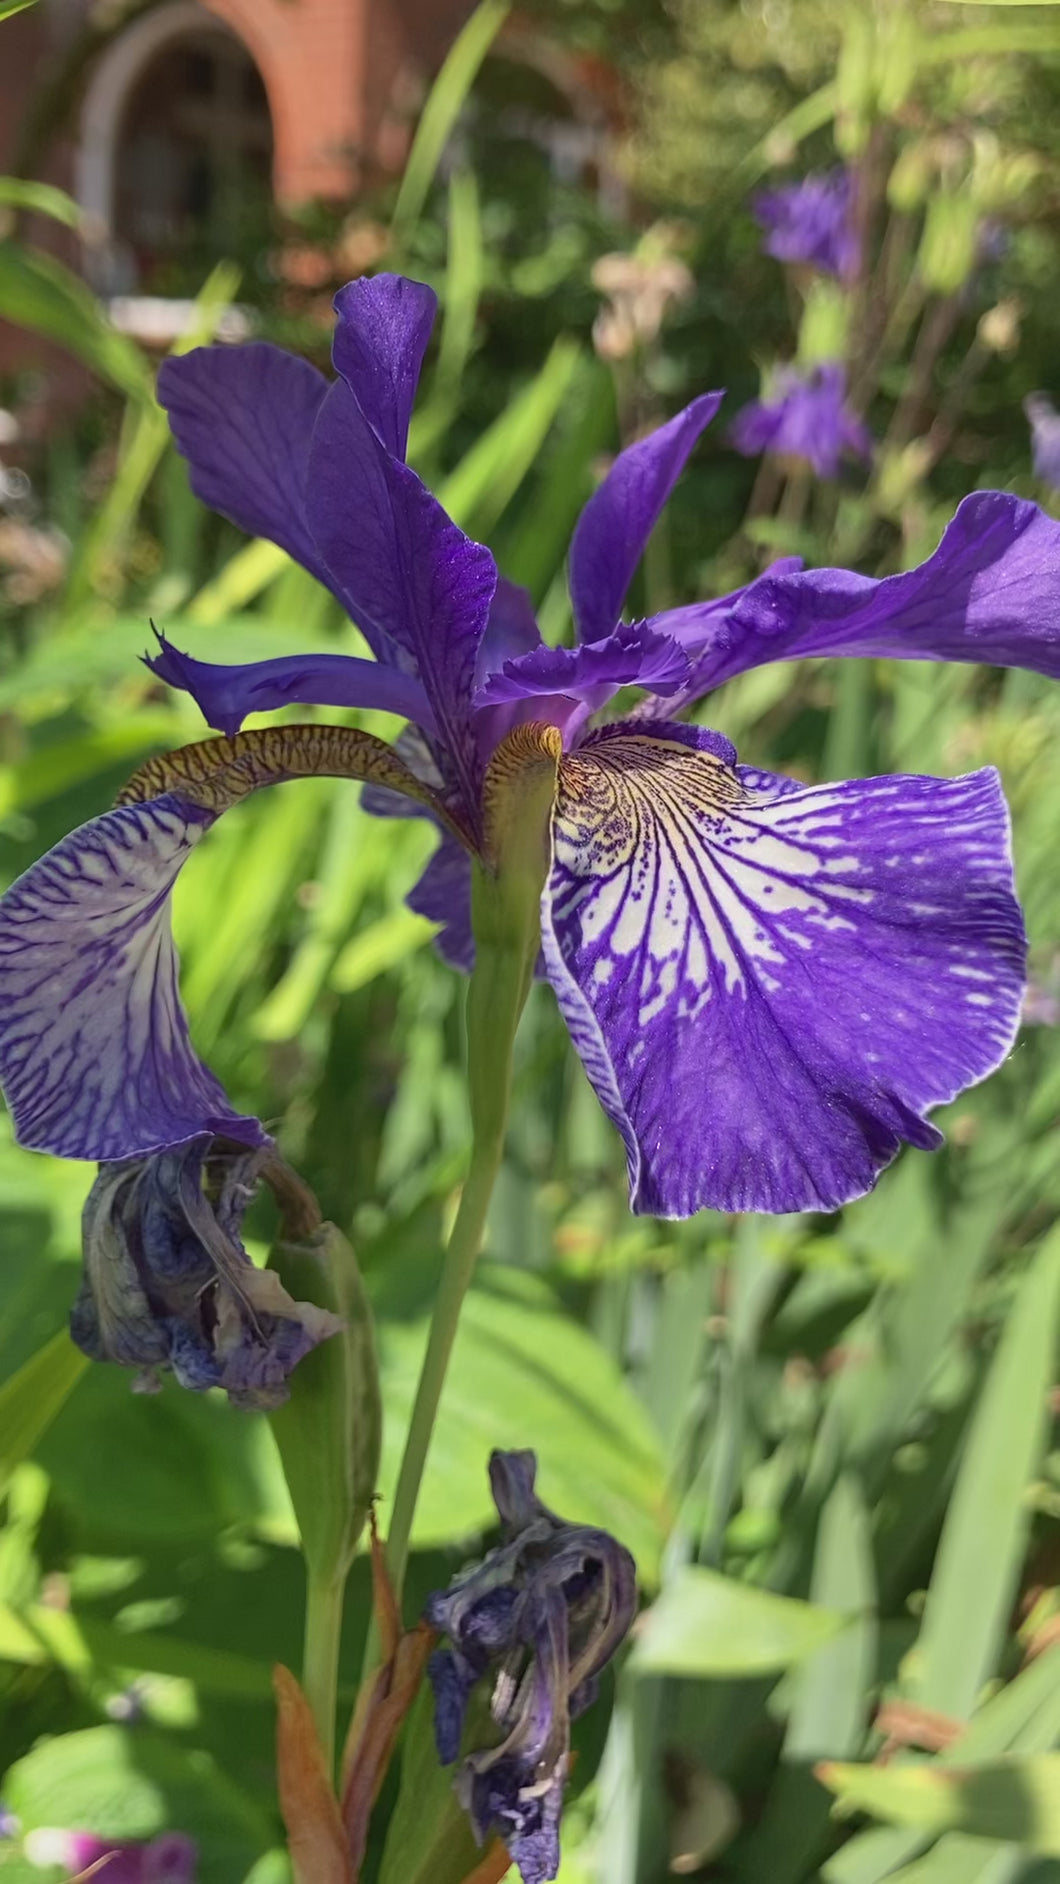 1 Bare Root of Iris Sibirica Includes Postage